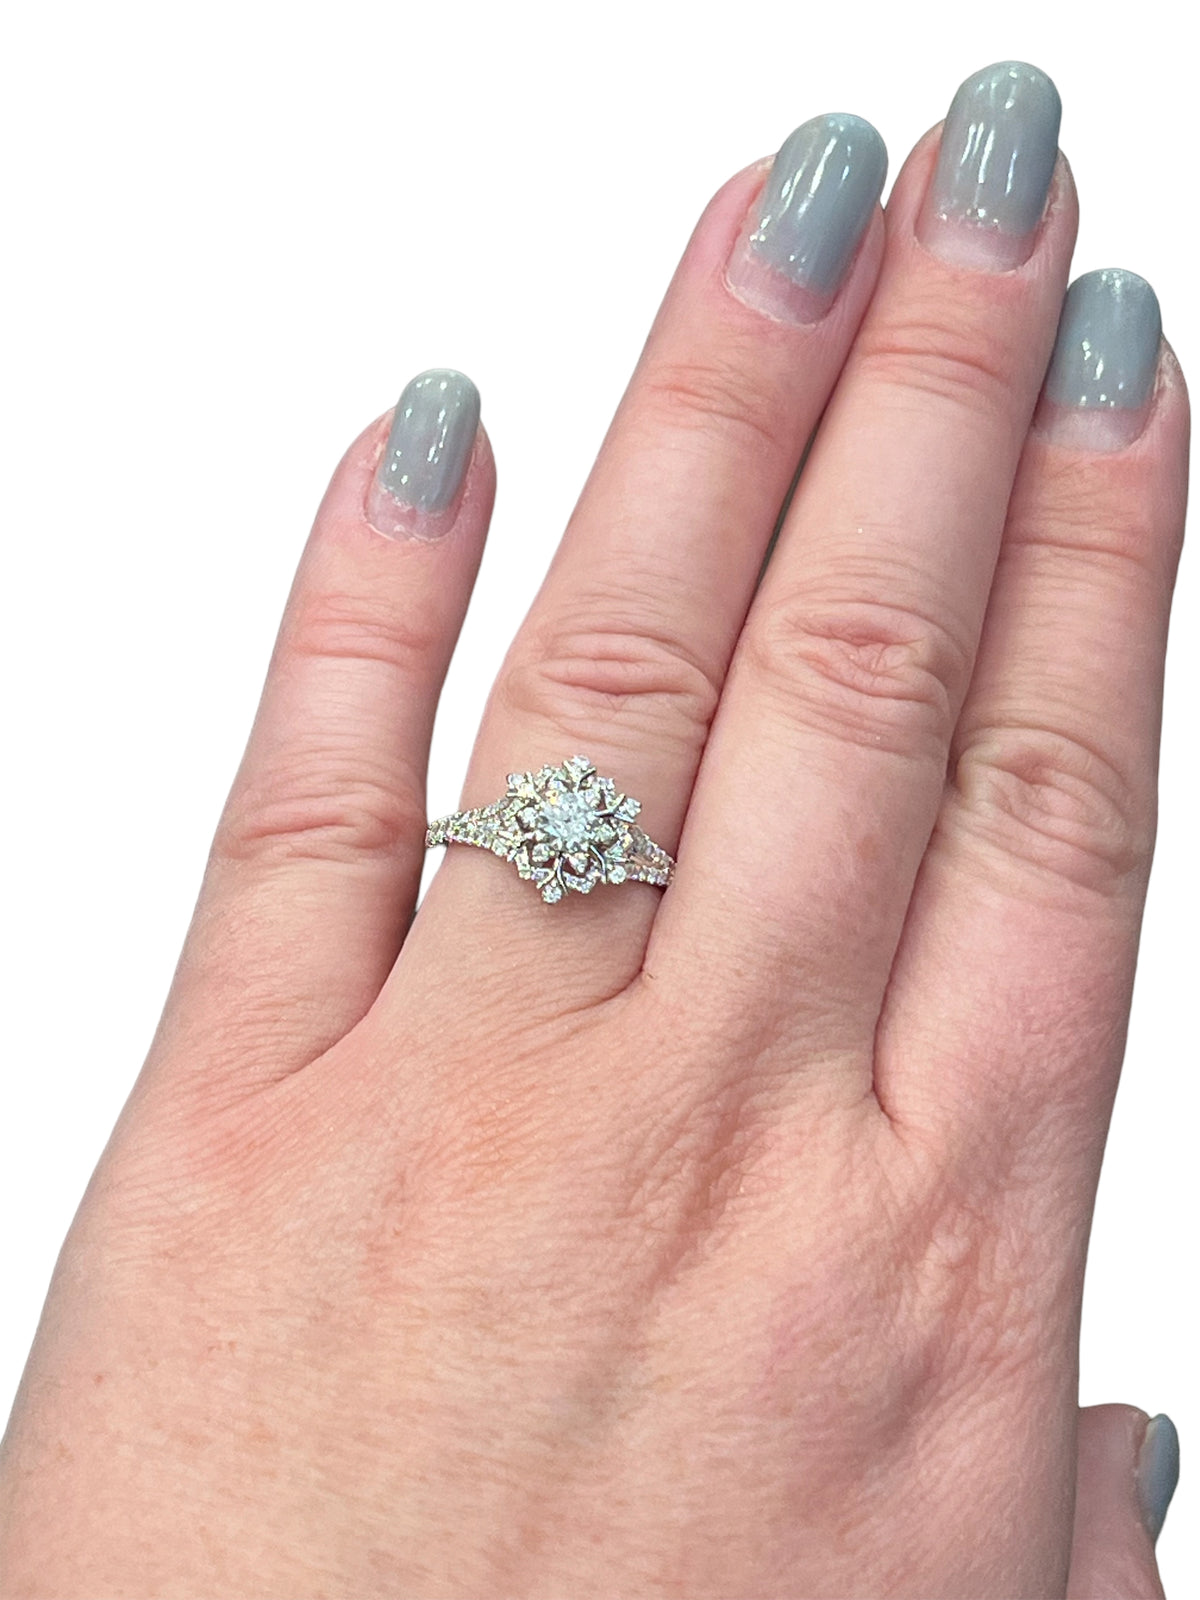 Previously Loved - Enchanted Disney Elsa 0.63 CT. T.W. Diamond Snowflake Engagement Ring in 14K White Gold